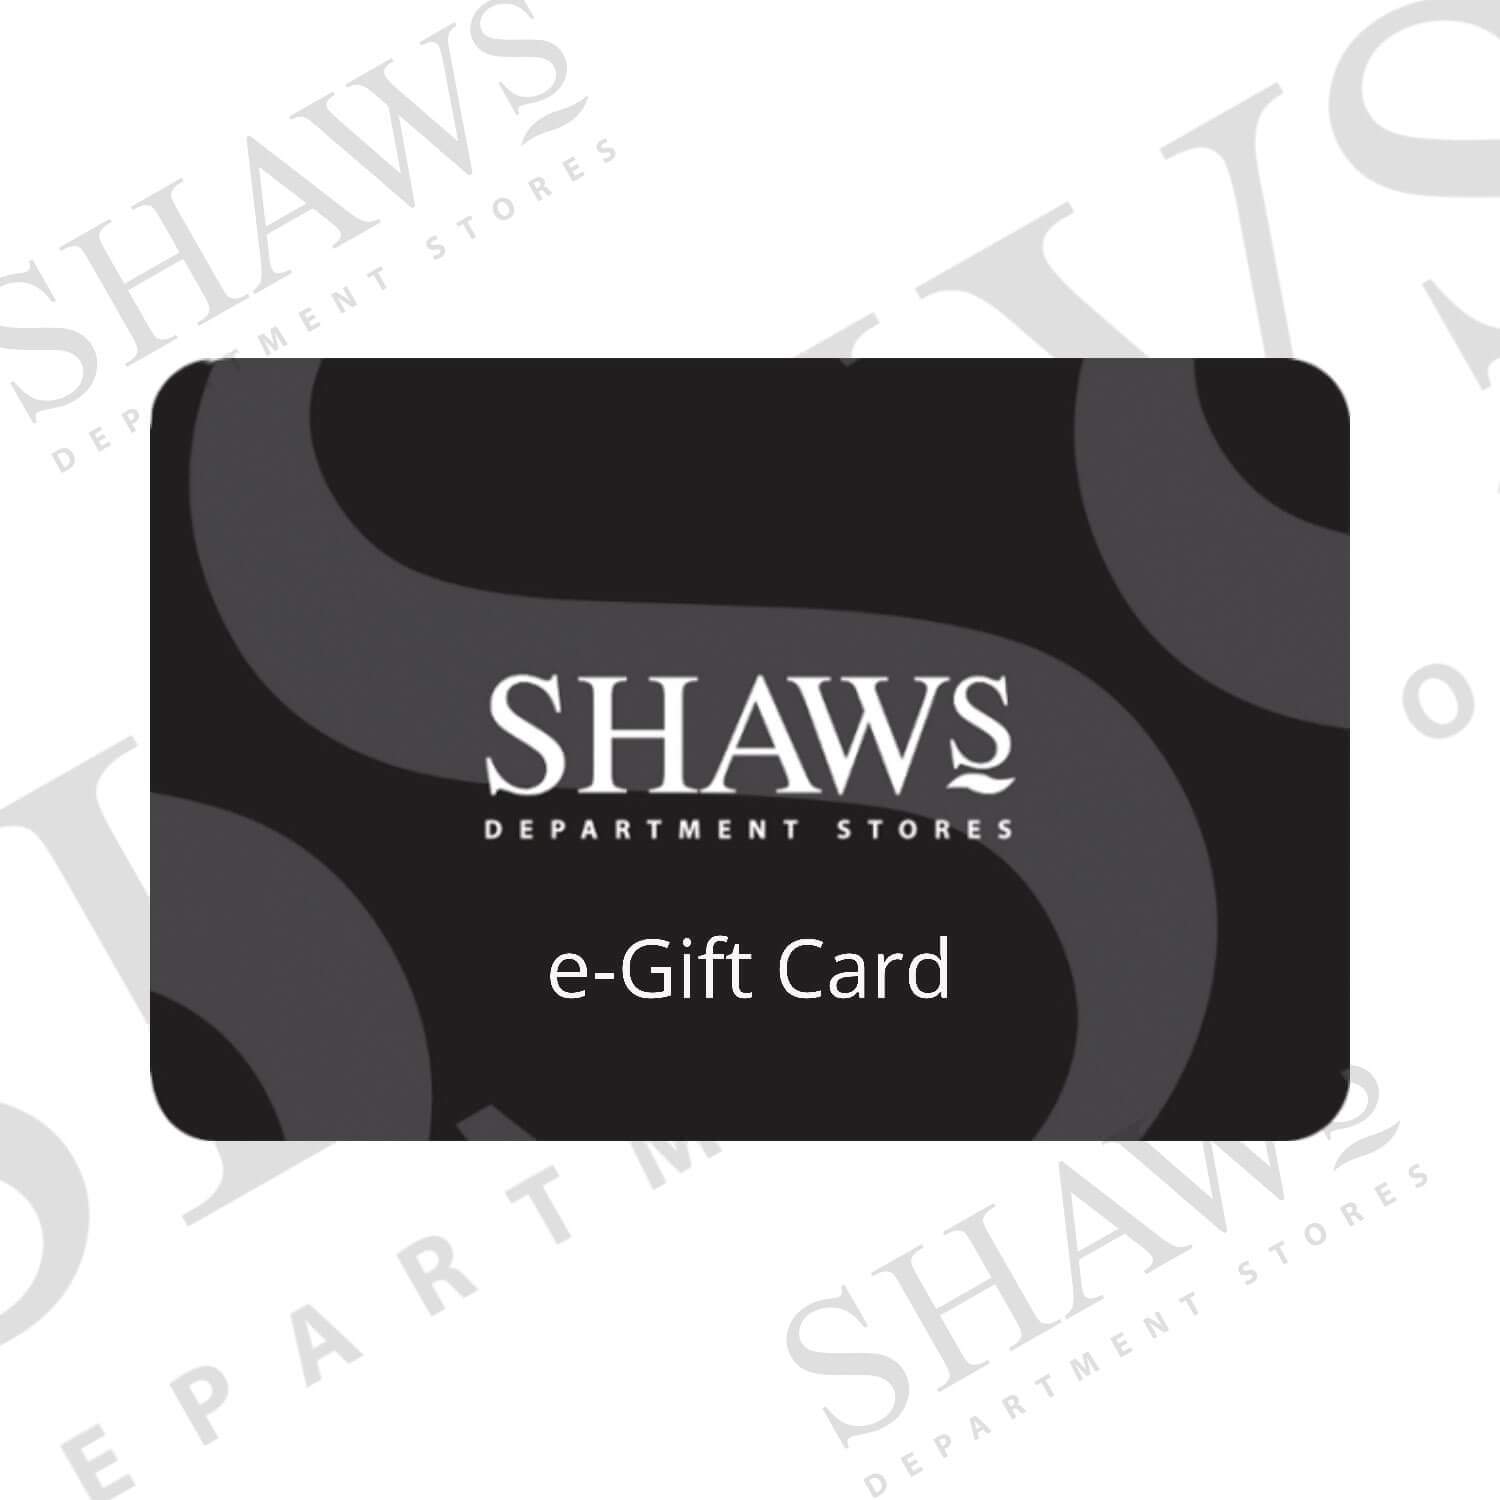 Shaws E-Gift Card - Online Only 1 Shaws Department Stores